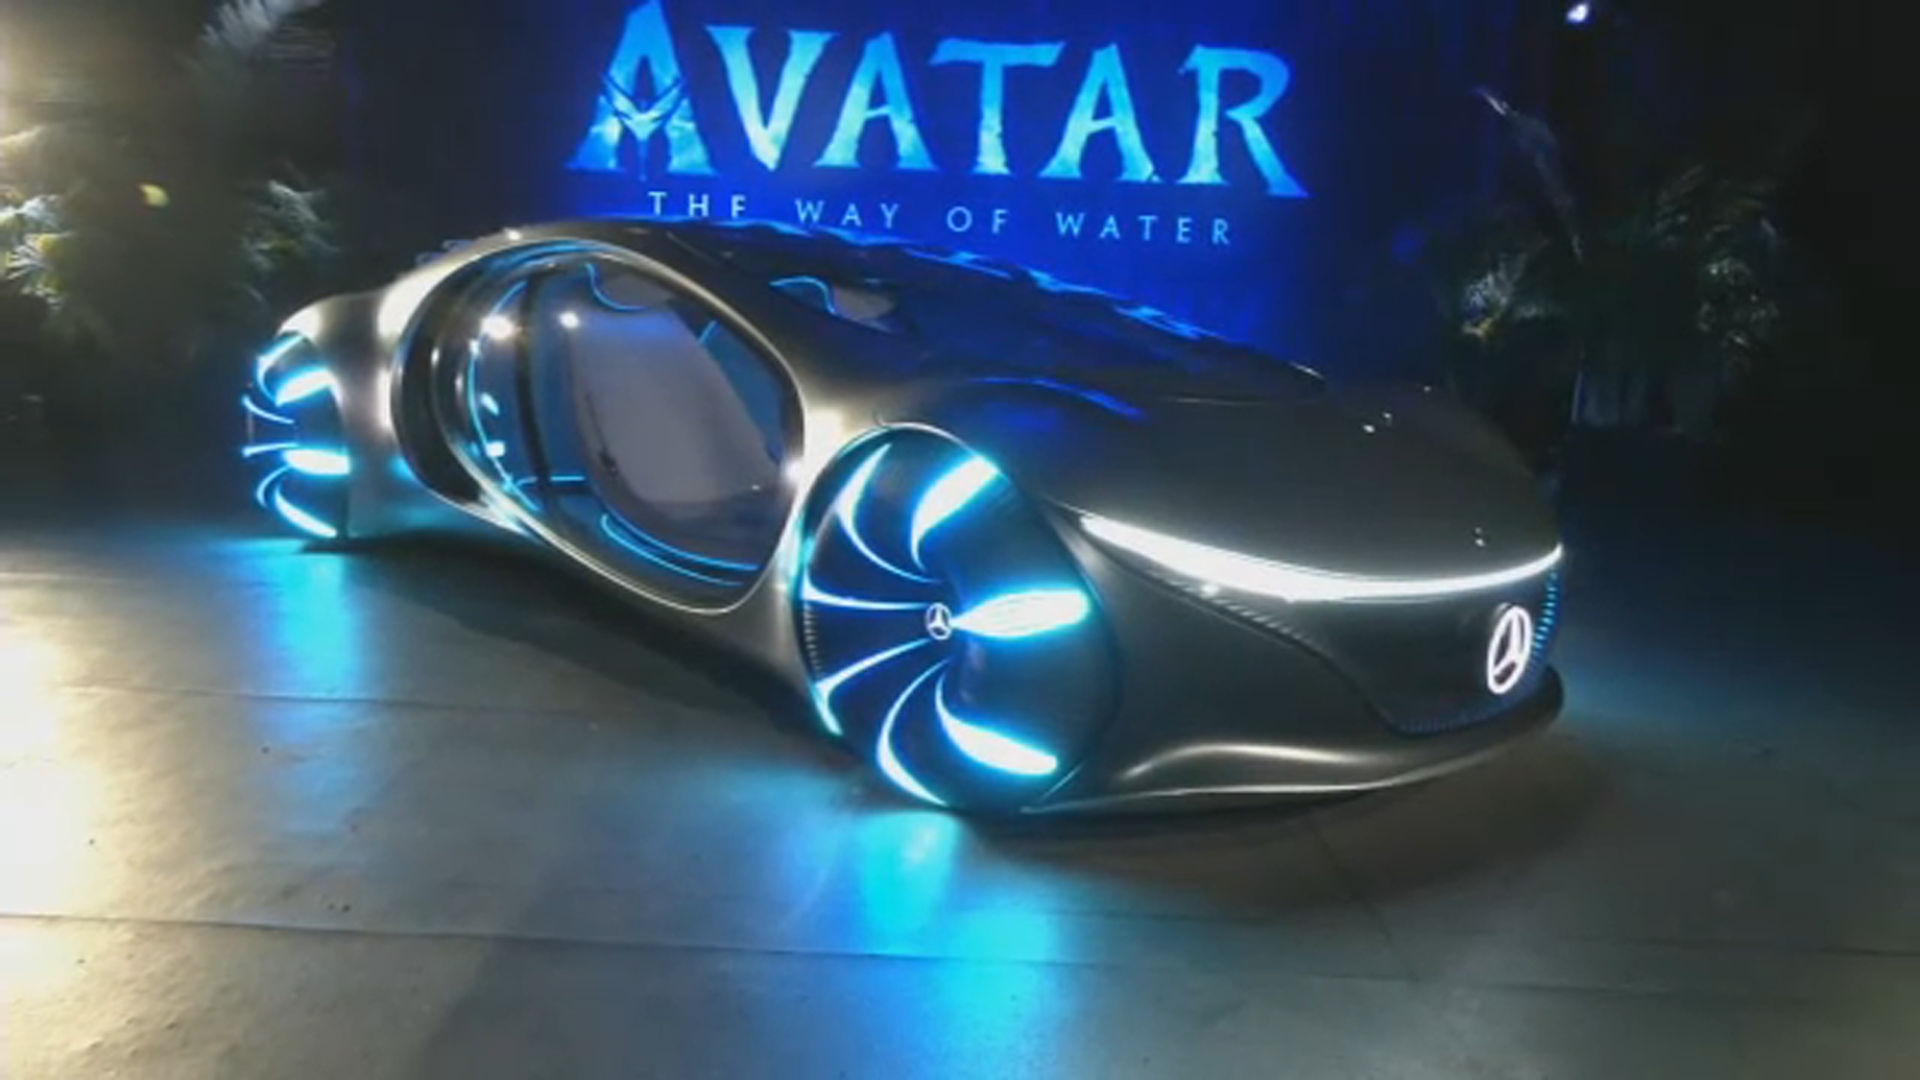 VISION AVTR: Mercedes Benz Creates Futuristic Concept Car Inspired By ' Avatar' Films